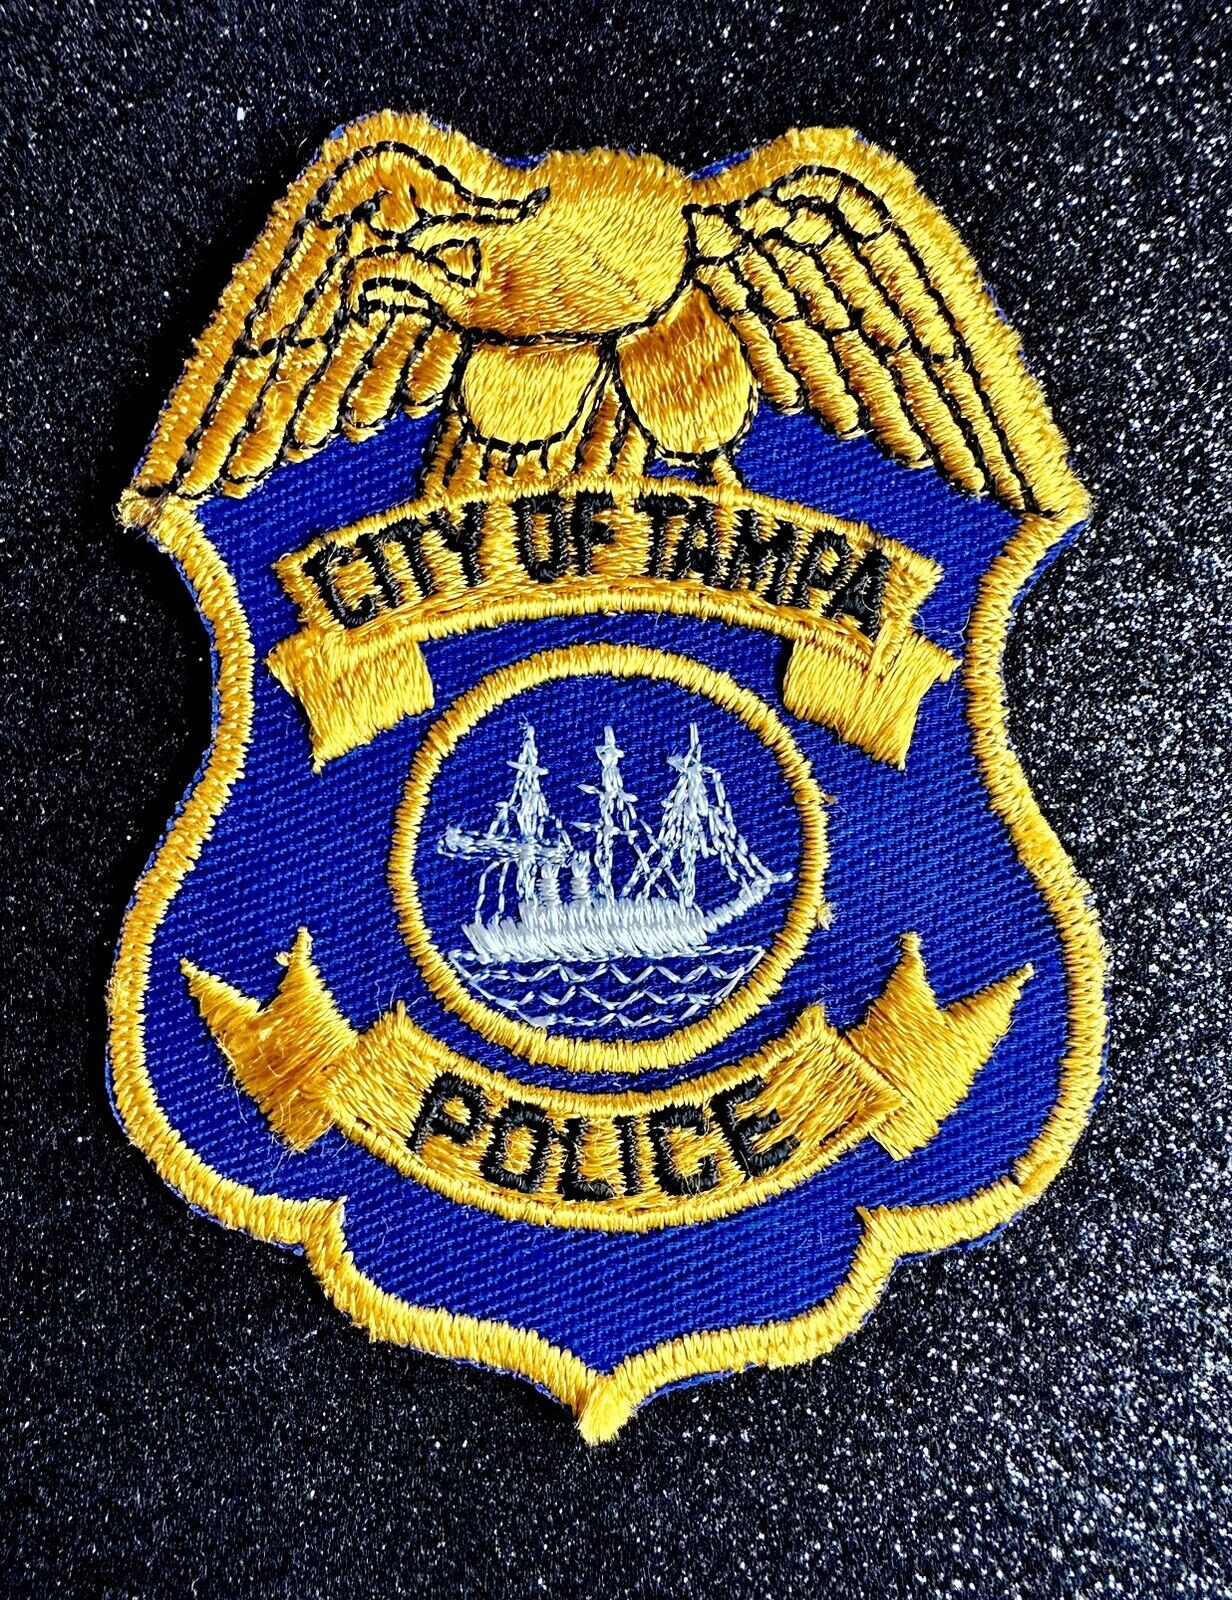 City of Tampa Florida Police Patch ~ Vintage ~ Excellent Condition